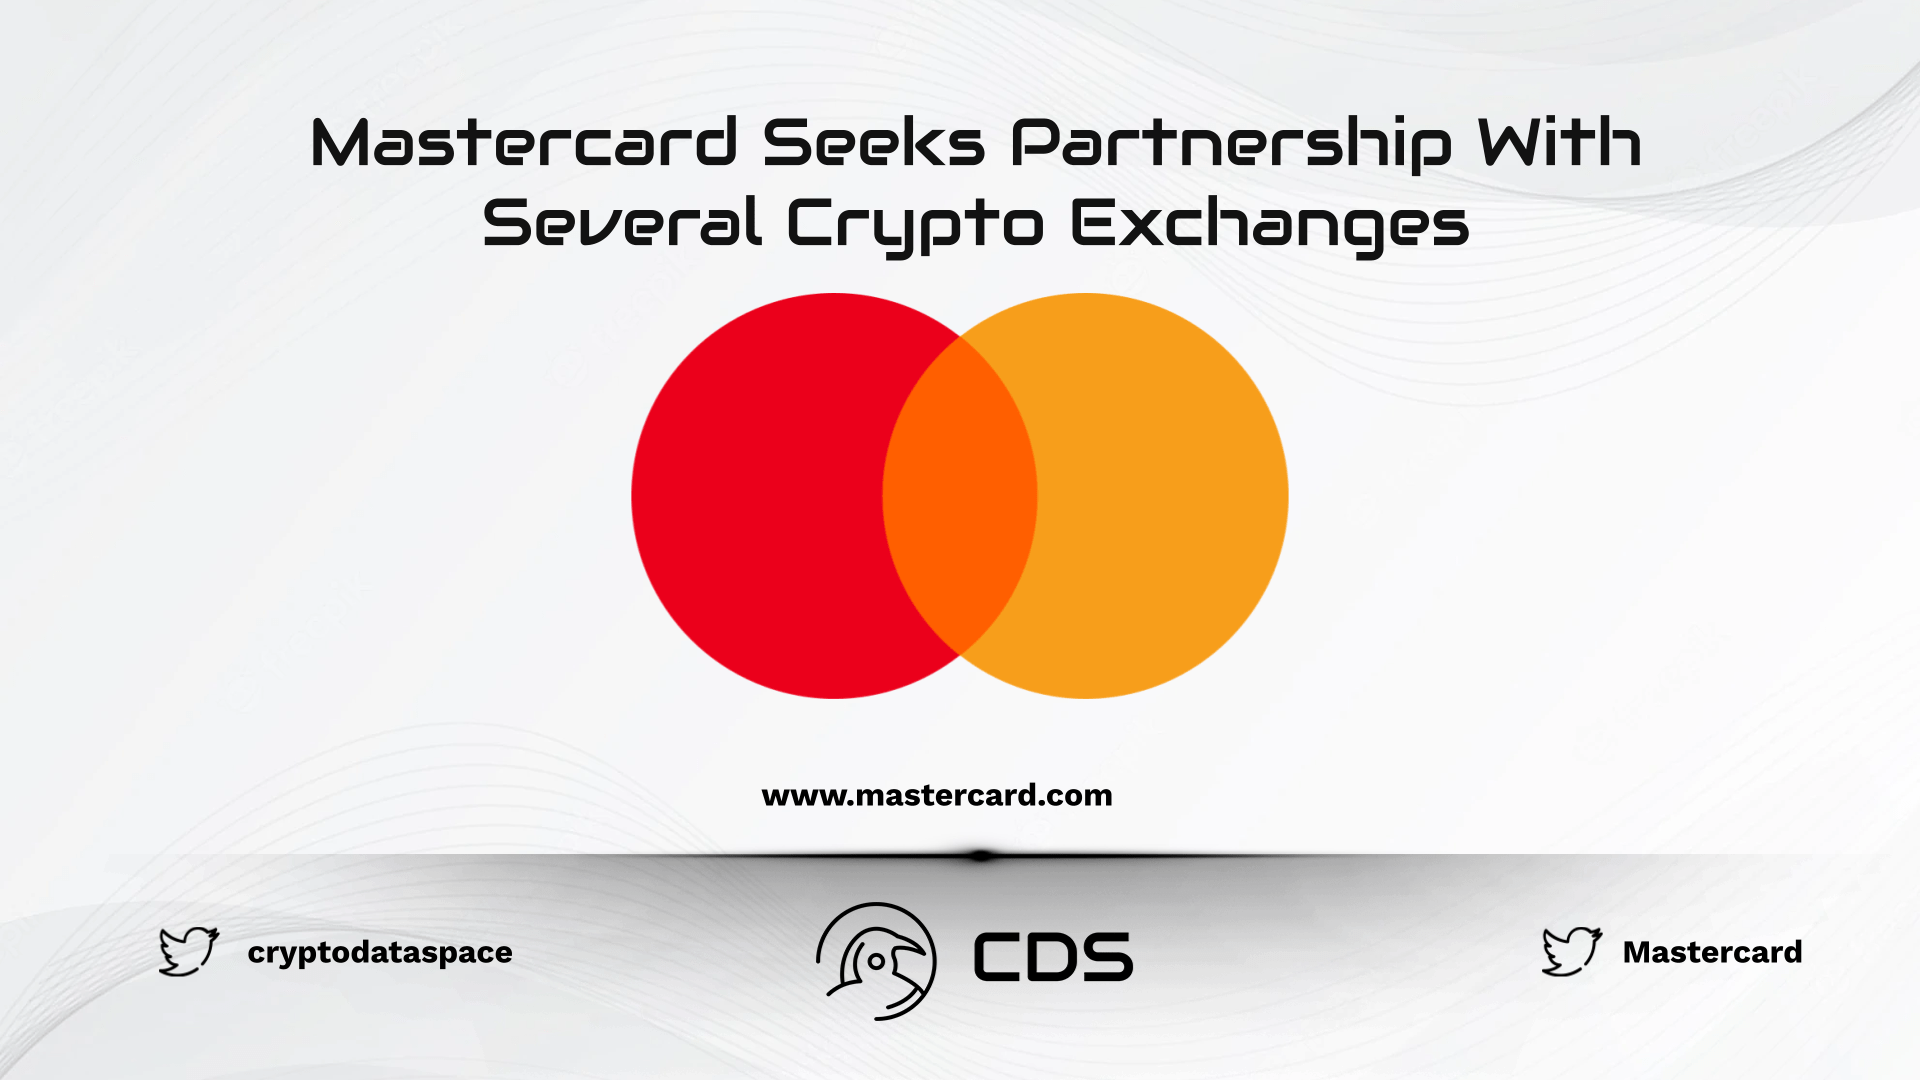 Mastercard Seeks Partnership With Several Crypto Exchanges